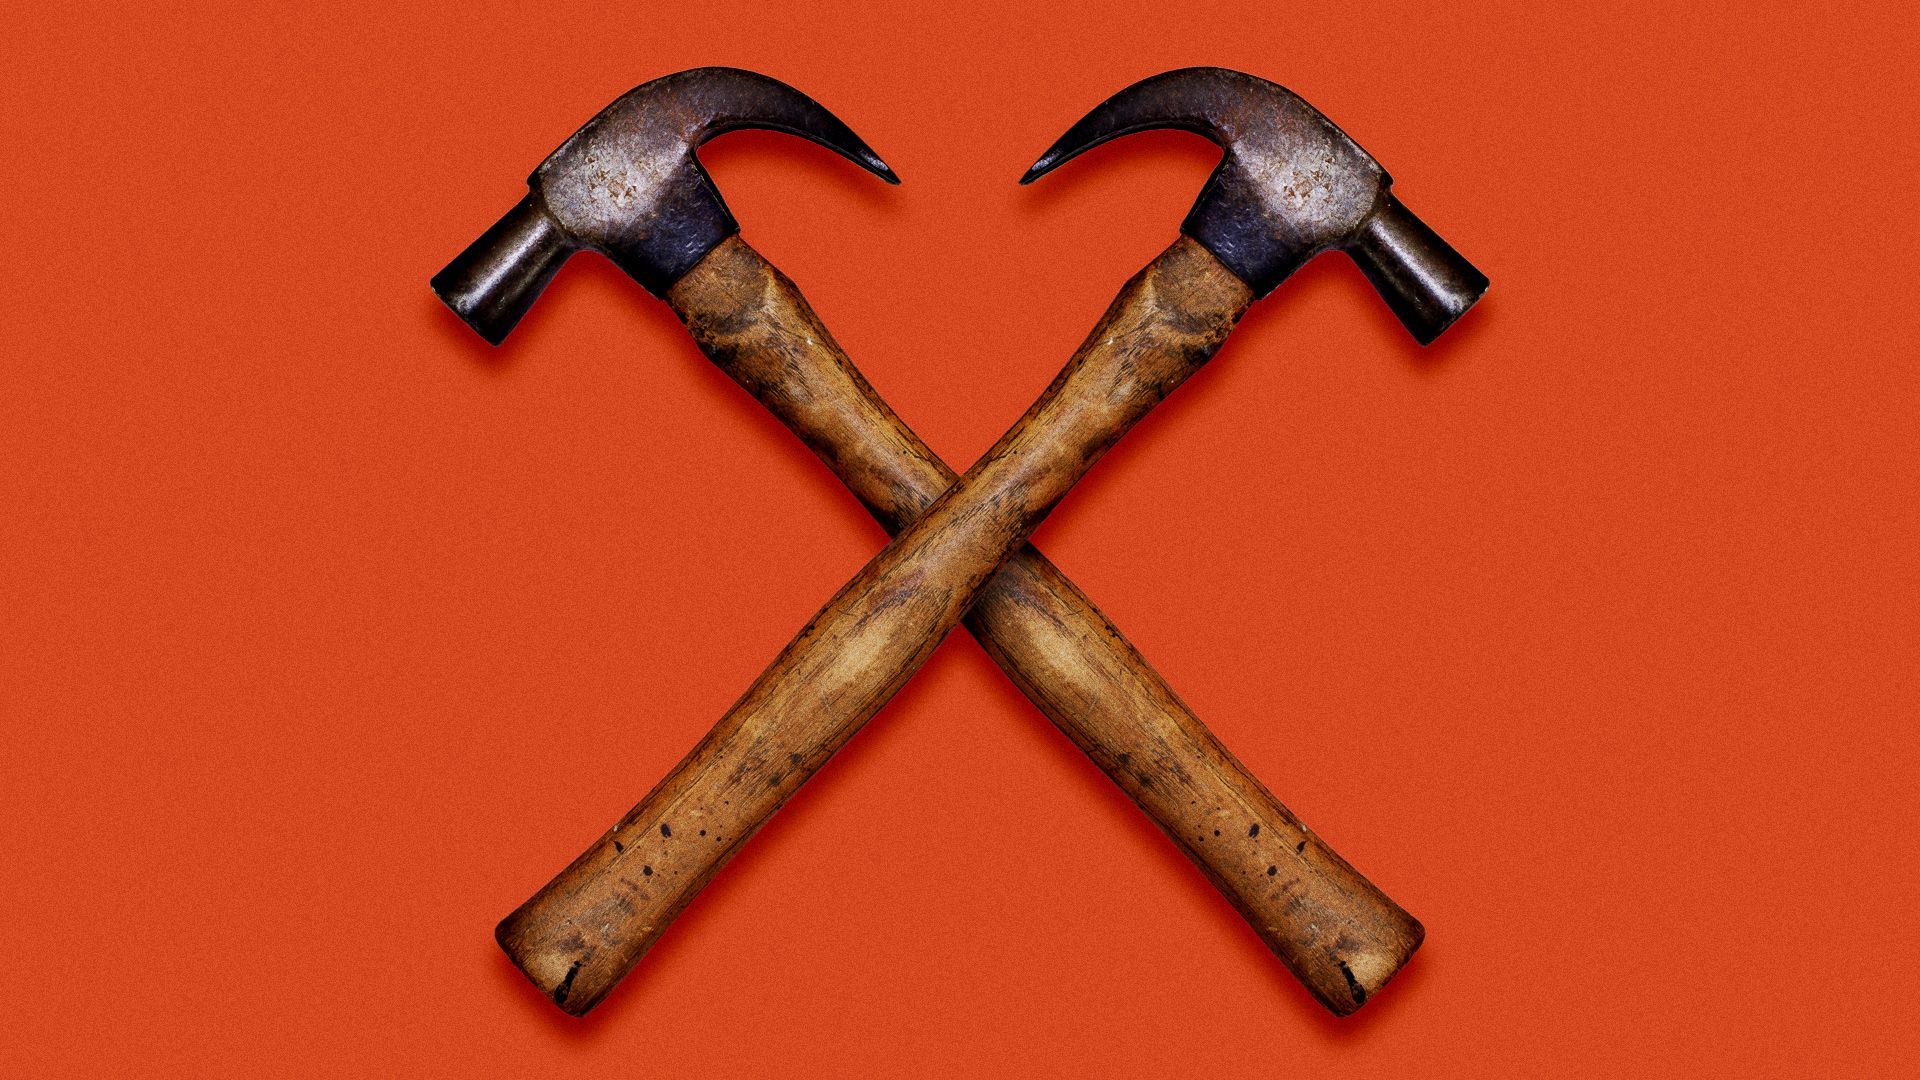 Illustration of two hammers forming an "X" shape. 